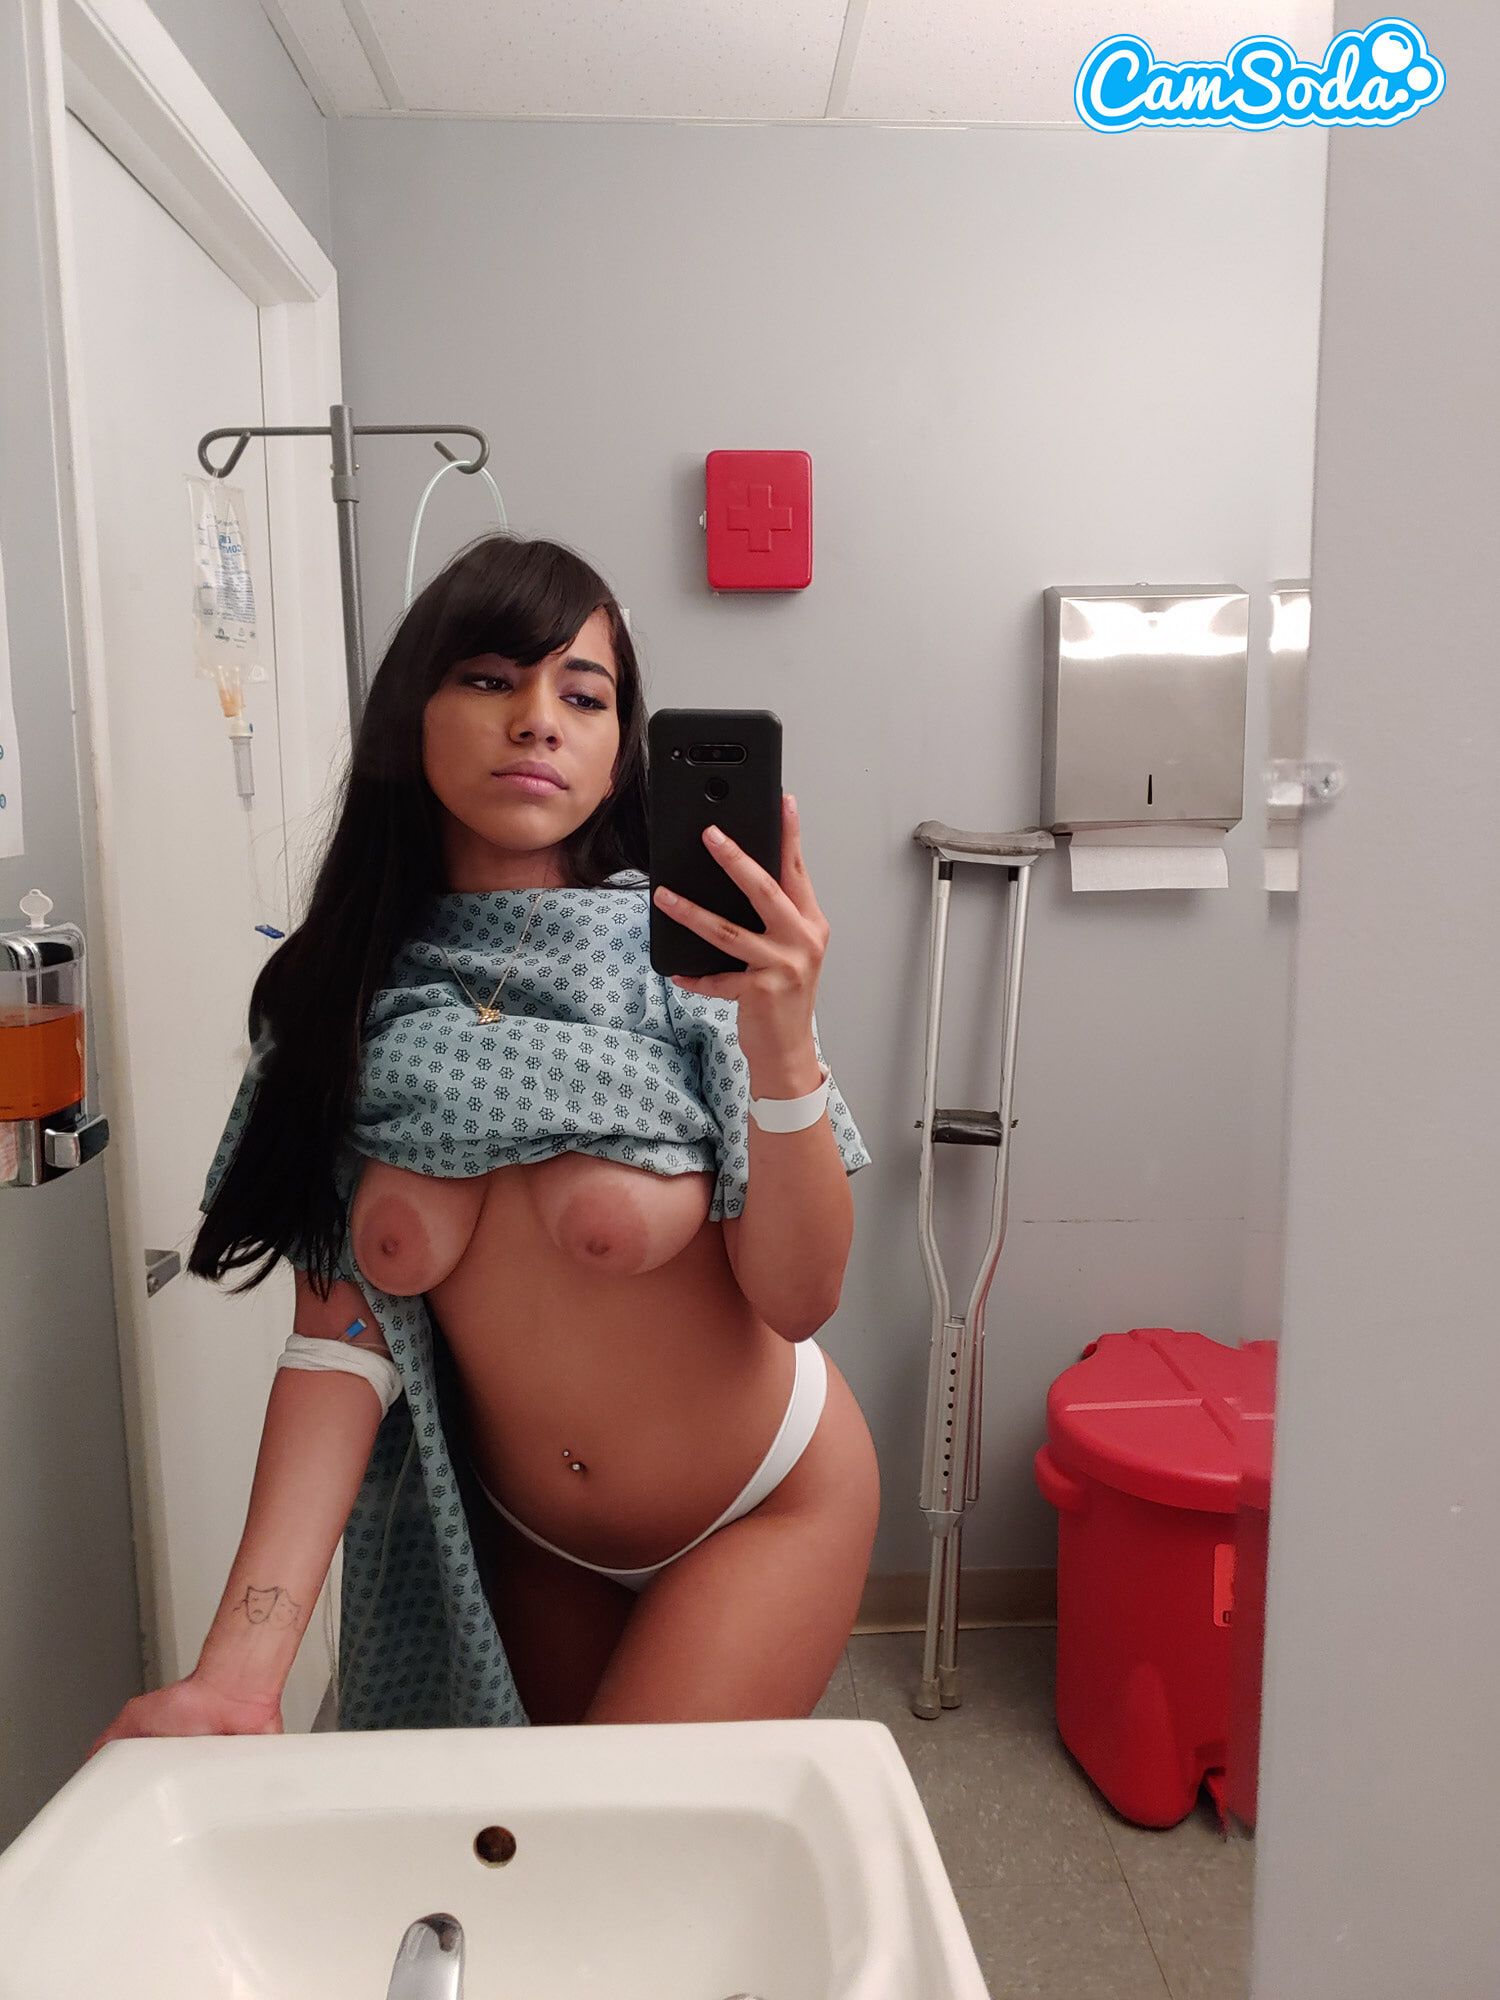 Big bootied latina teen gets horny in the ER #2